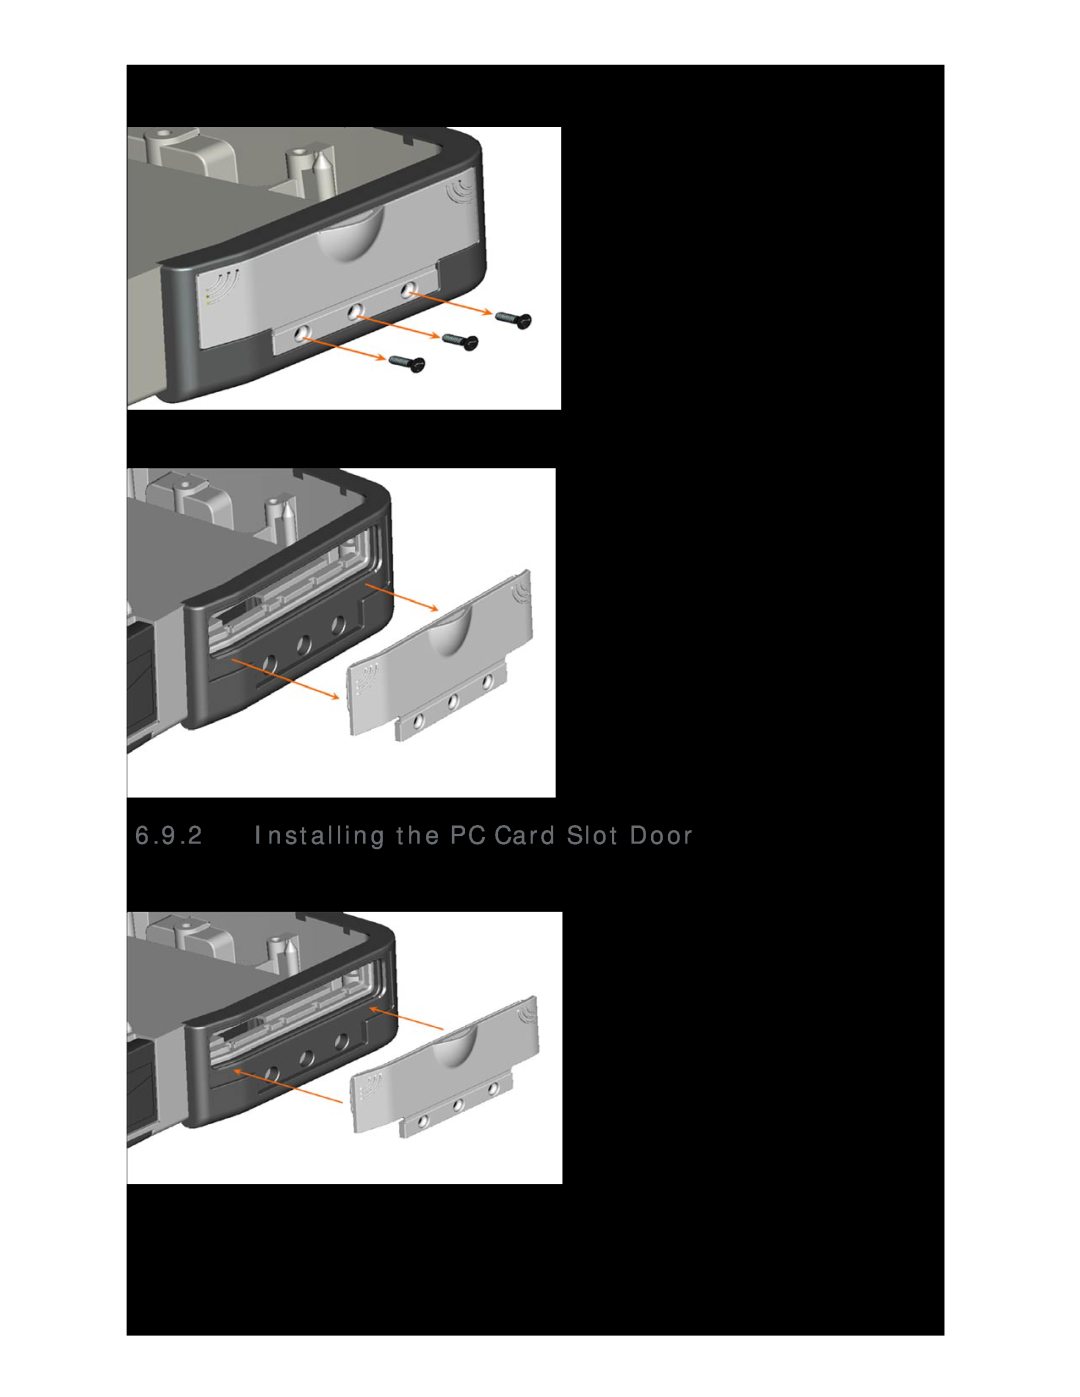 Dell Installing the PC Card Slot Door, DellTM XFR D630 Fully Rugged Notebook Service Manual, Page 36 of, Revision A01 